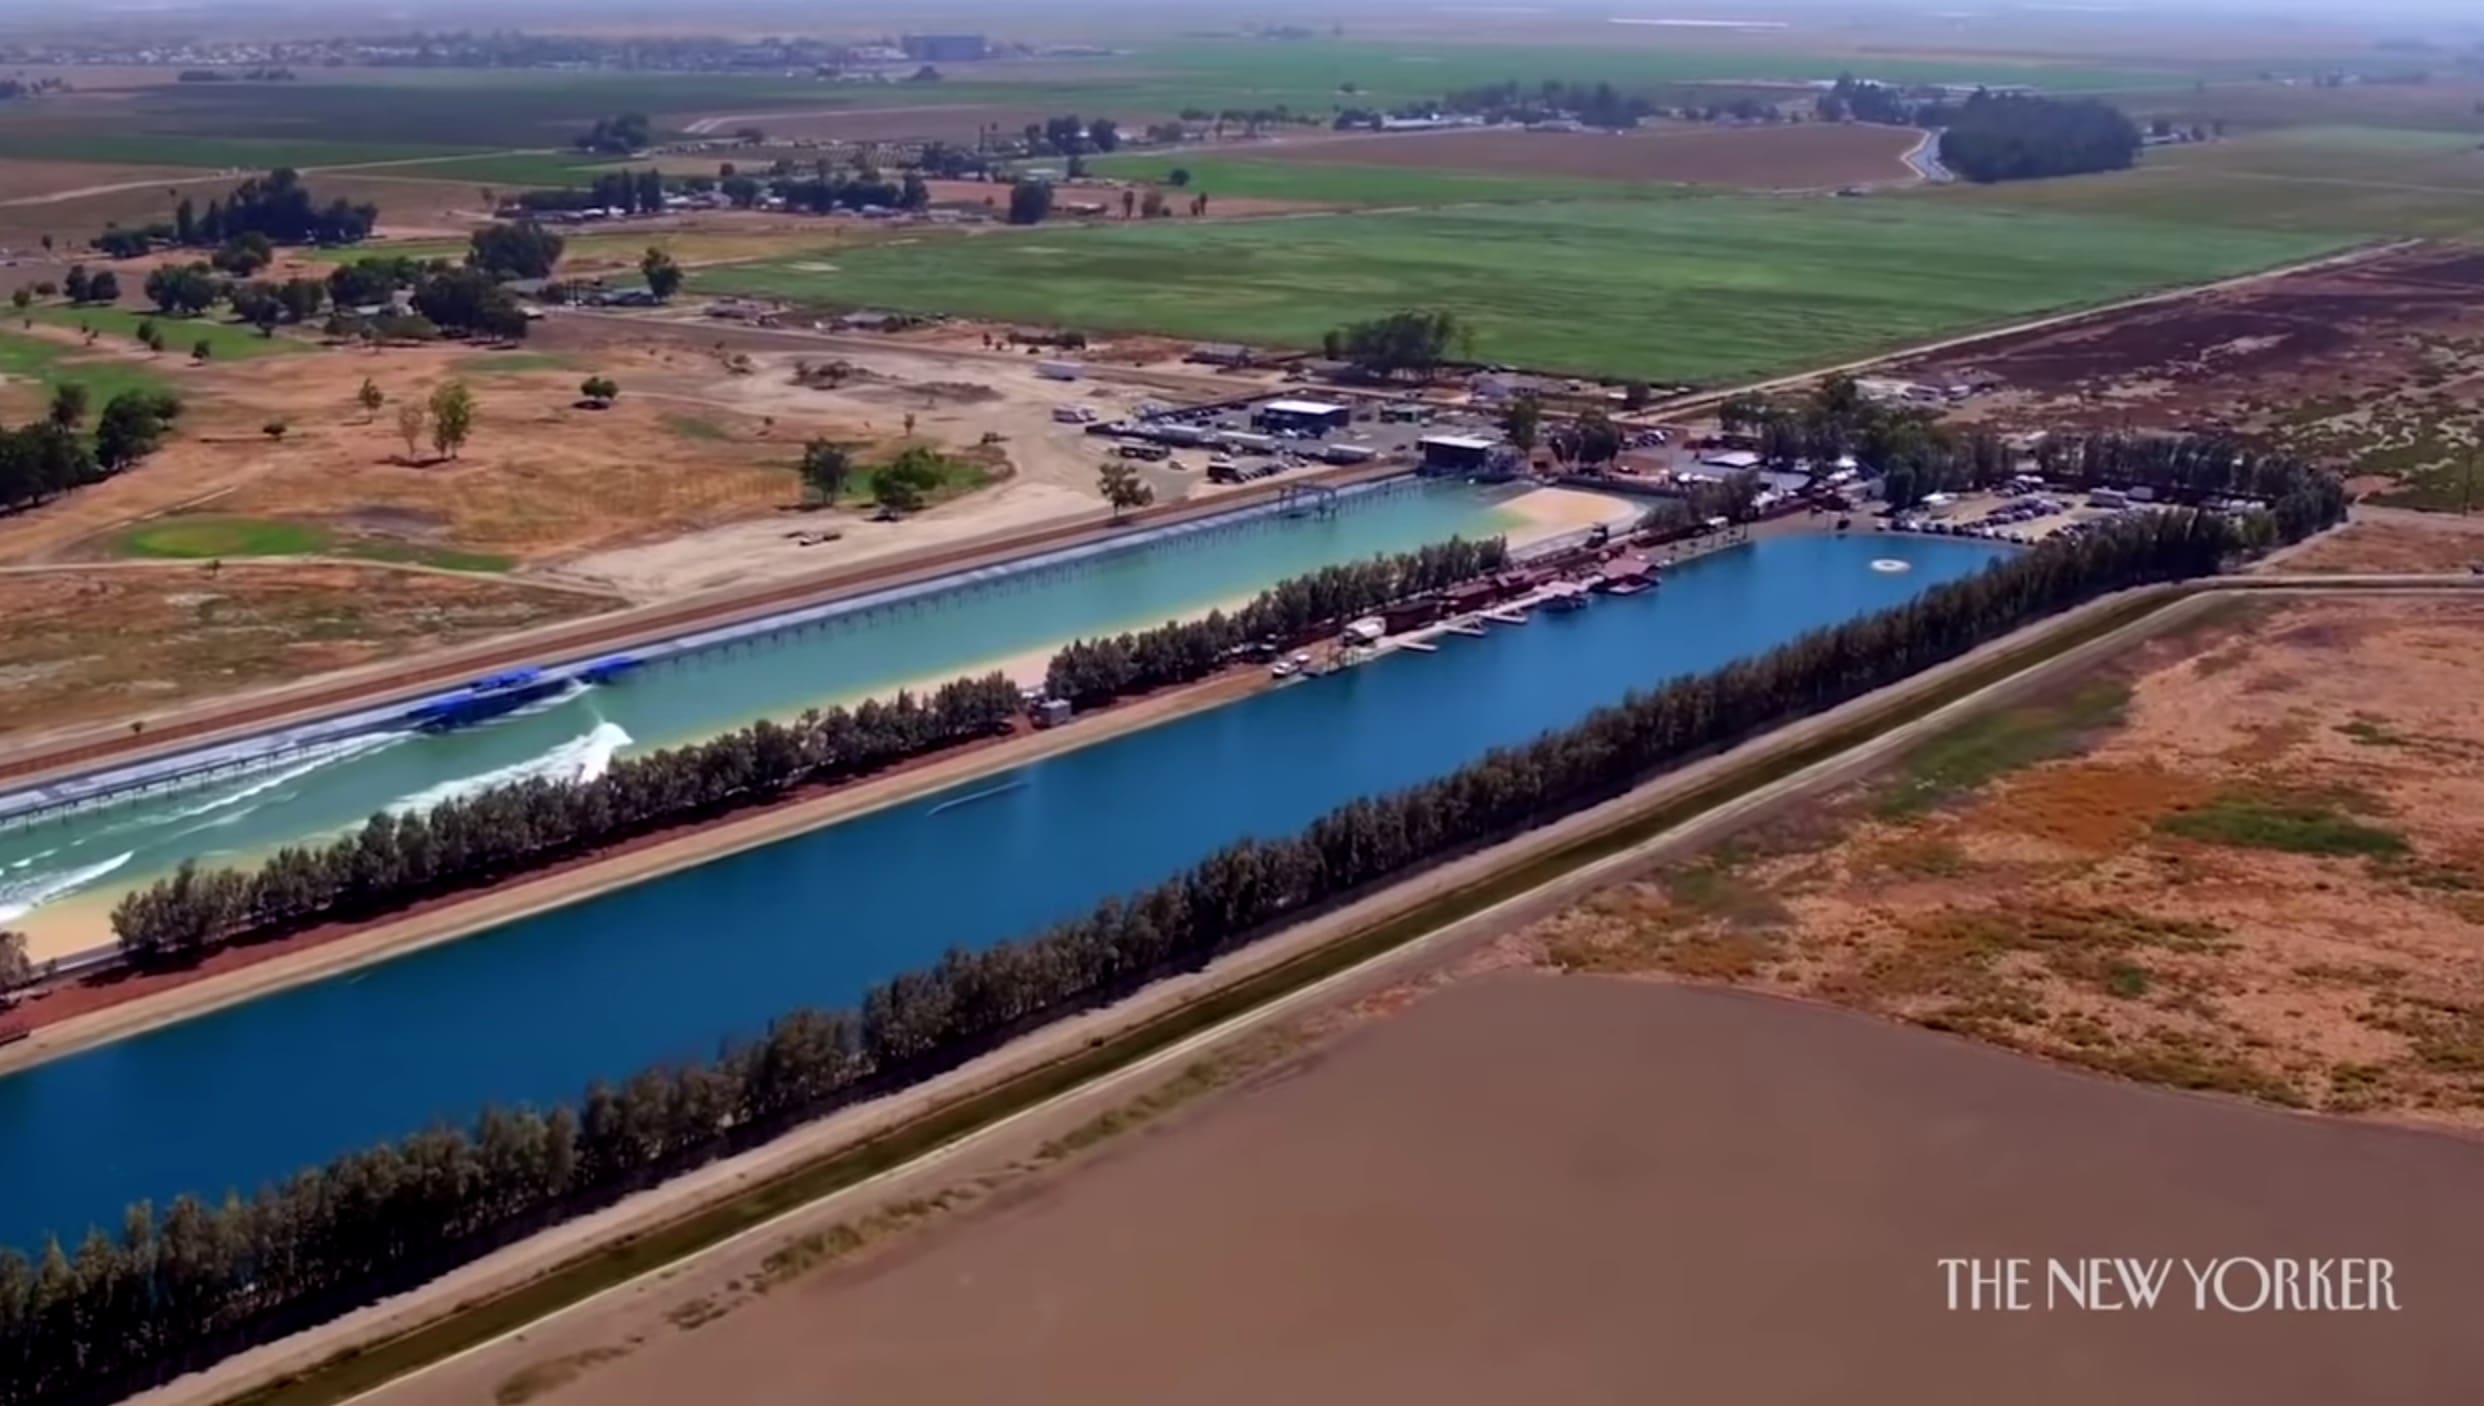 WATCH: The New Yorker Takes A Deep Dive Into Kelly Slaterâs Surf Ranch | Unofficial Networks